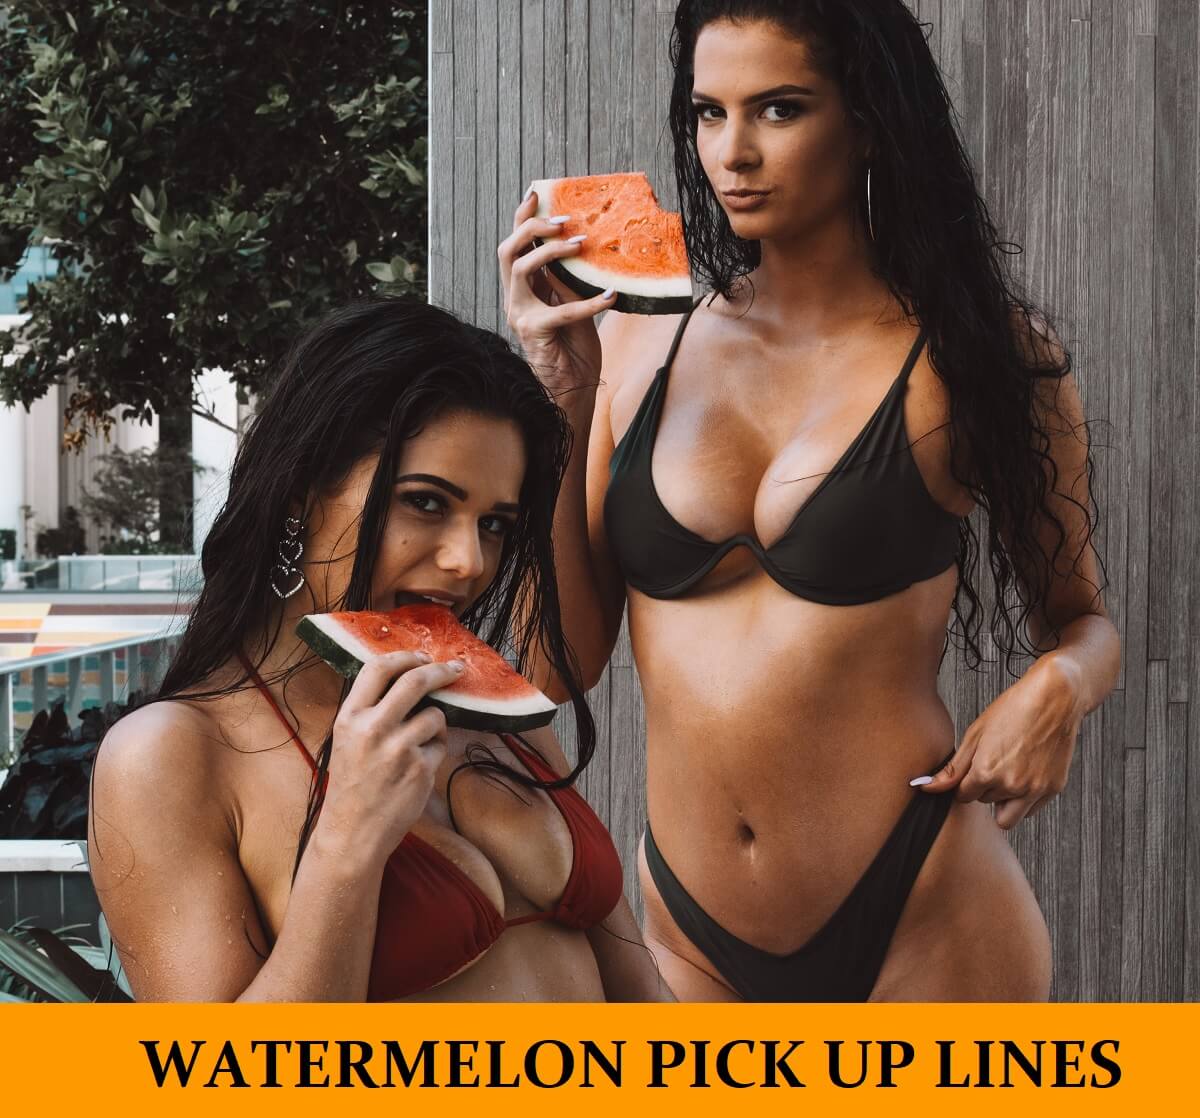 Pick Up Lines About Watermelons